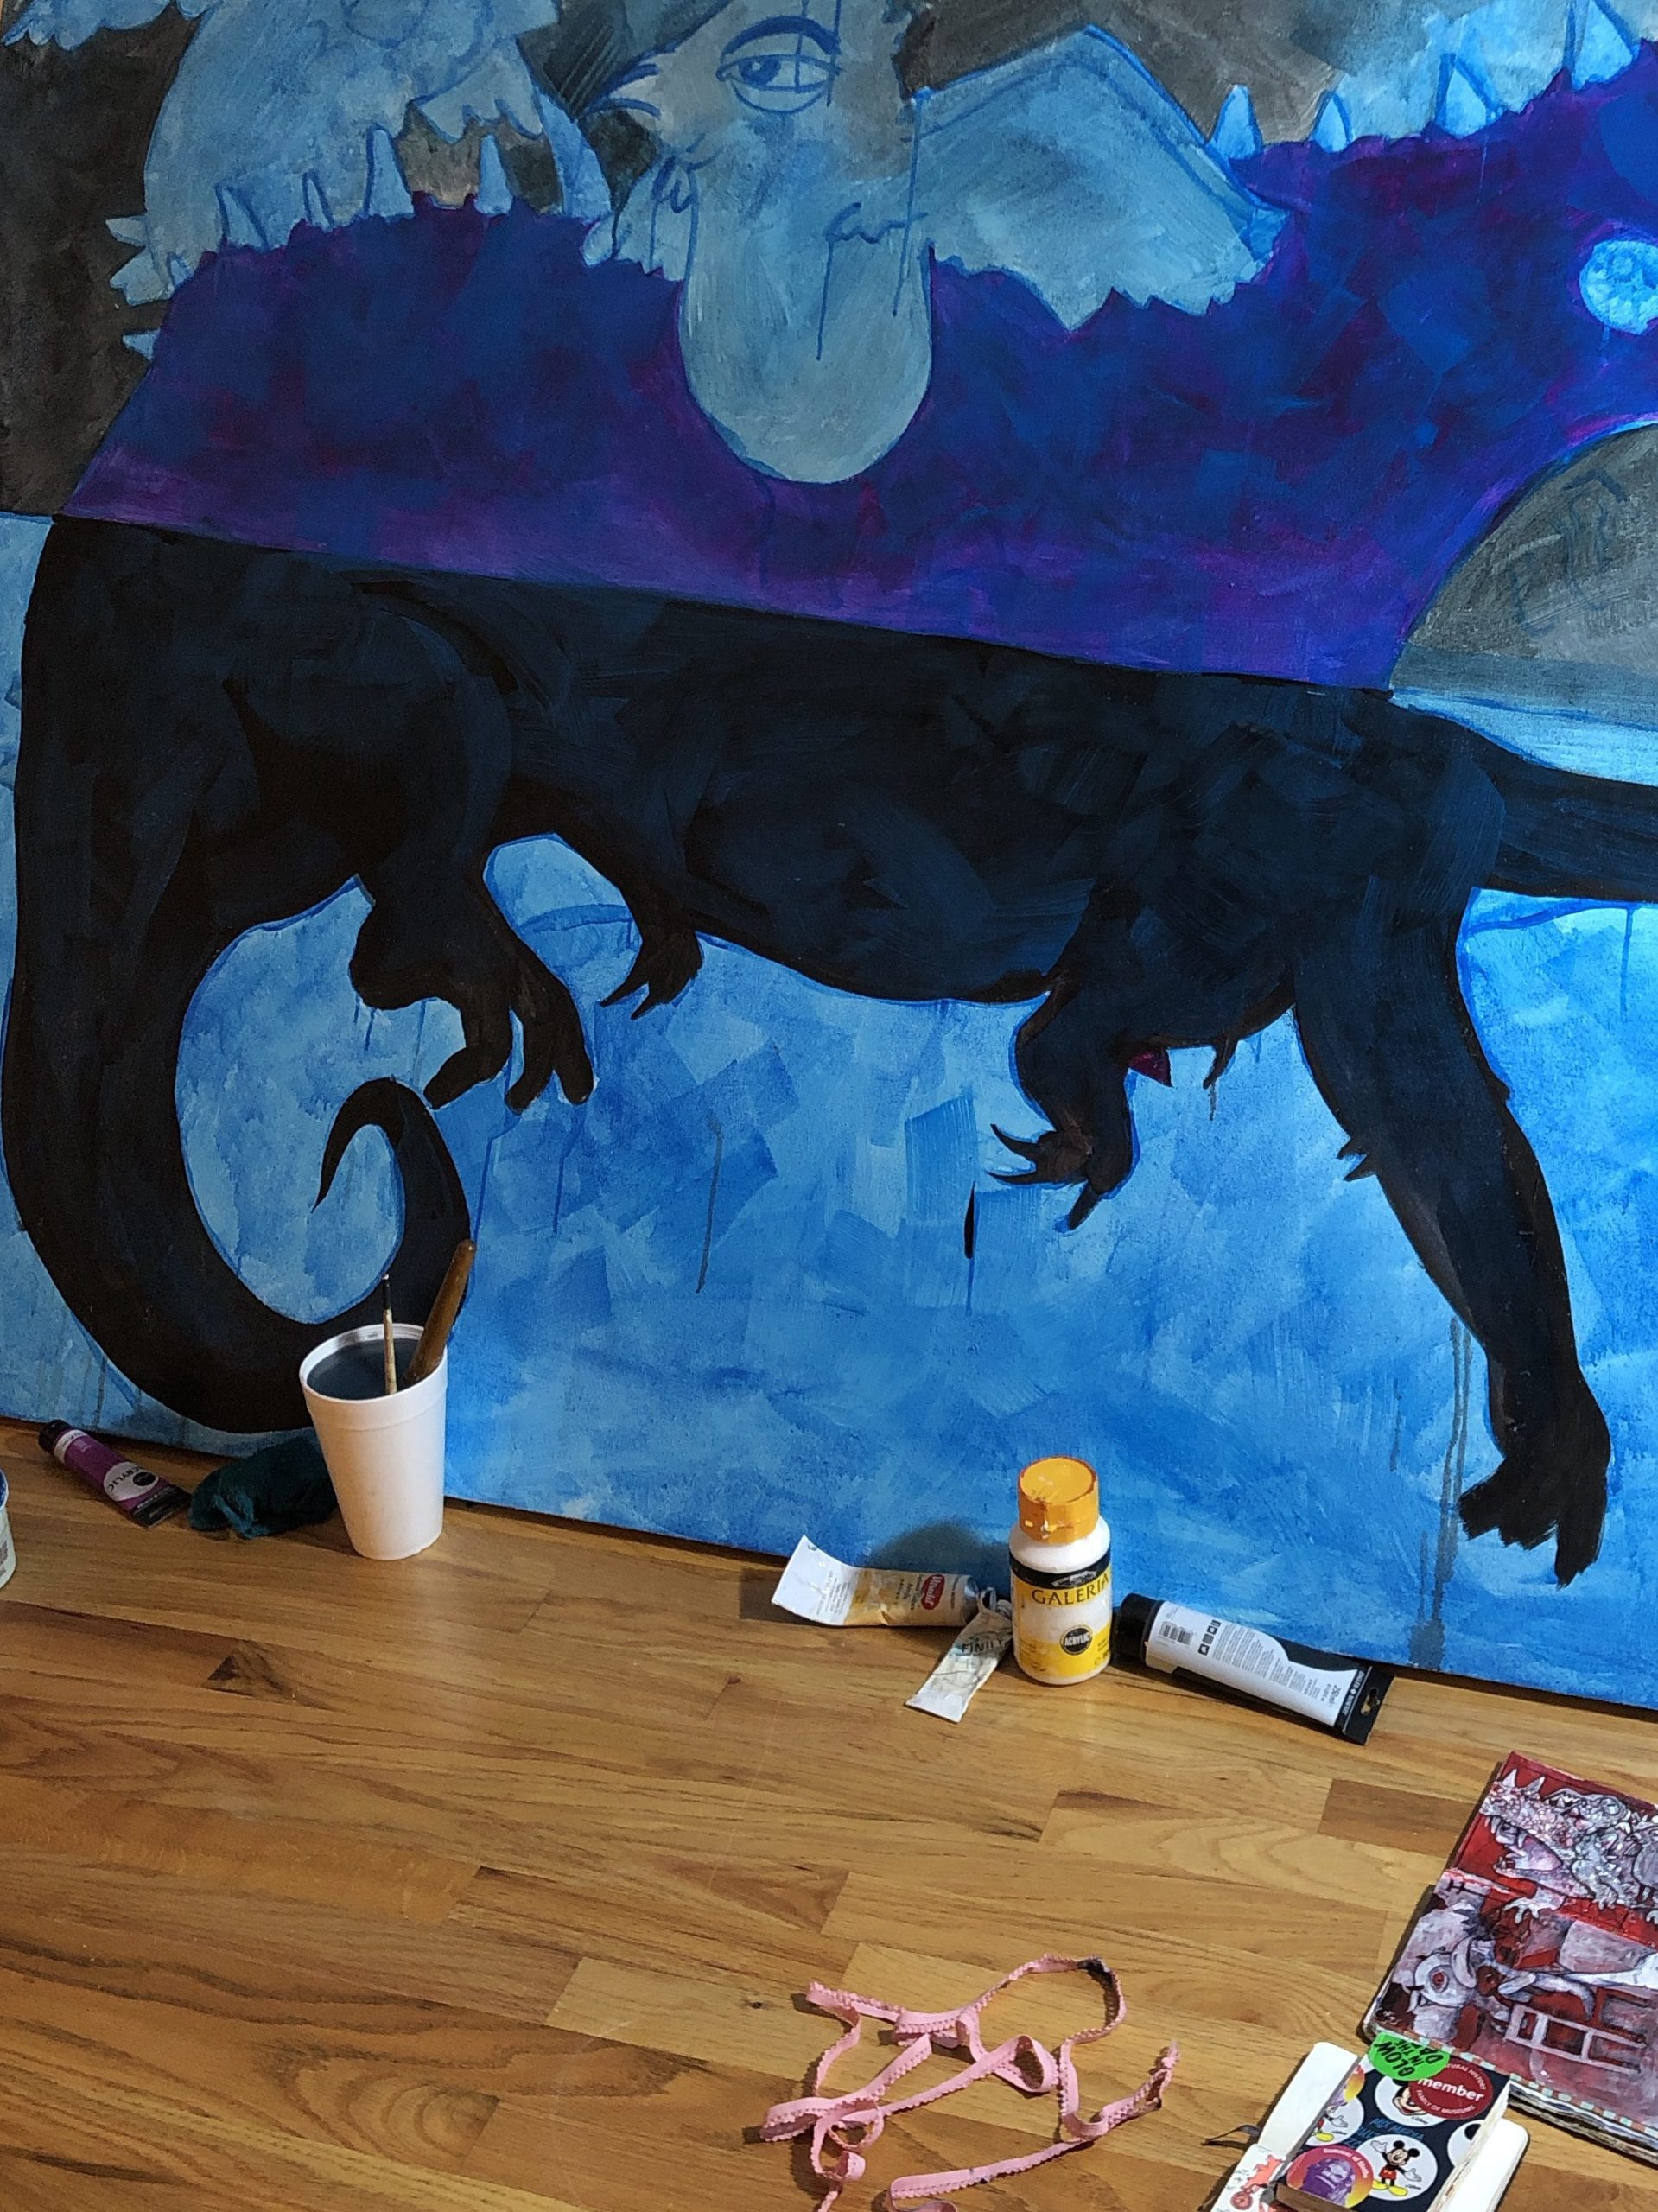 Painting in progress, Blue and purple tones with dark shapes and outlines